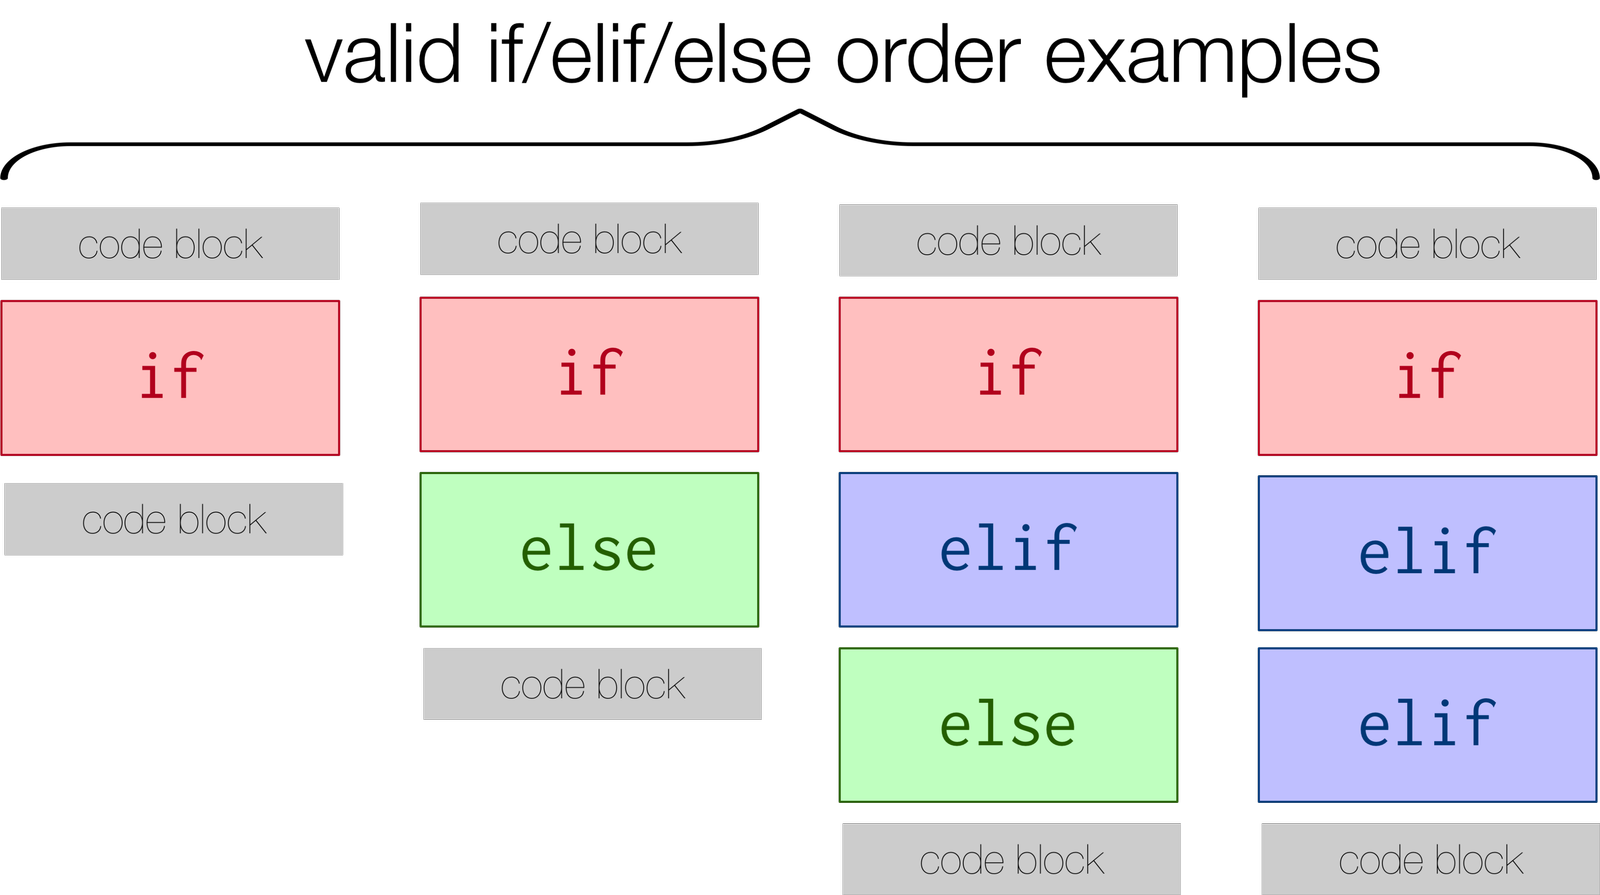 shows a unary conditiona, a binary conditional, a conditional with if, elif, else, and a conditional with if, elif, and elif.